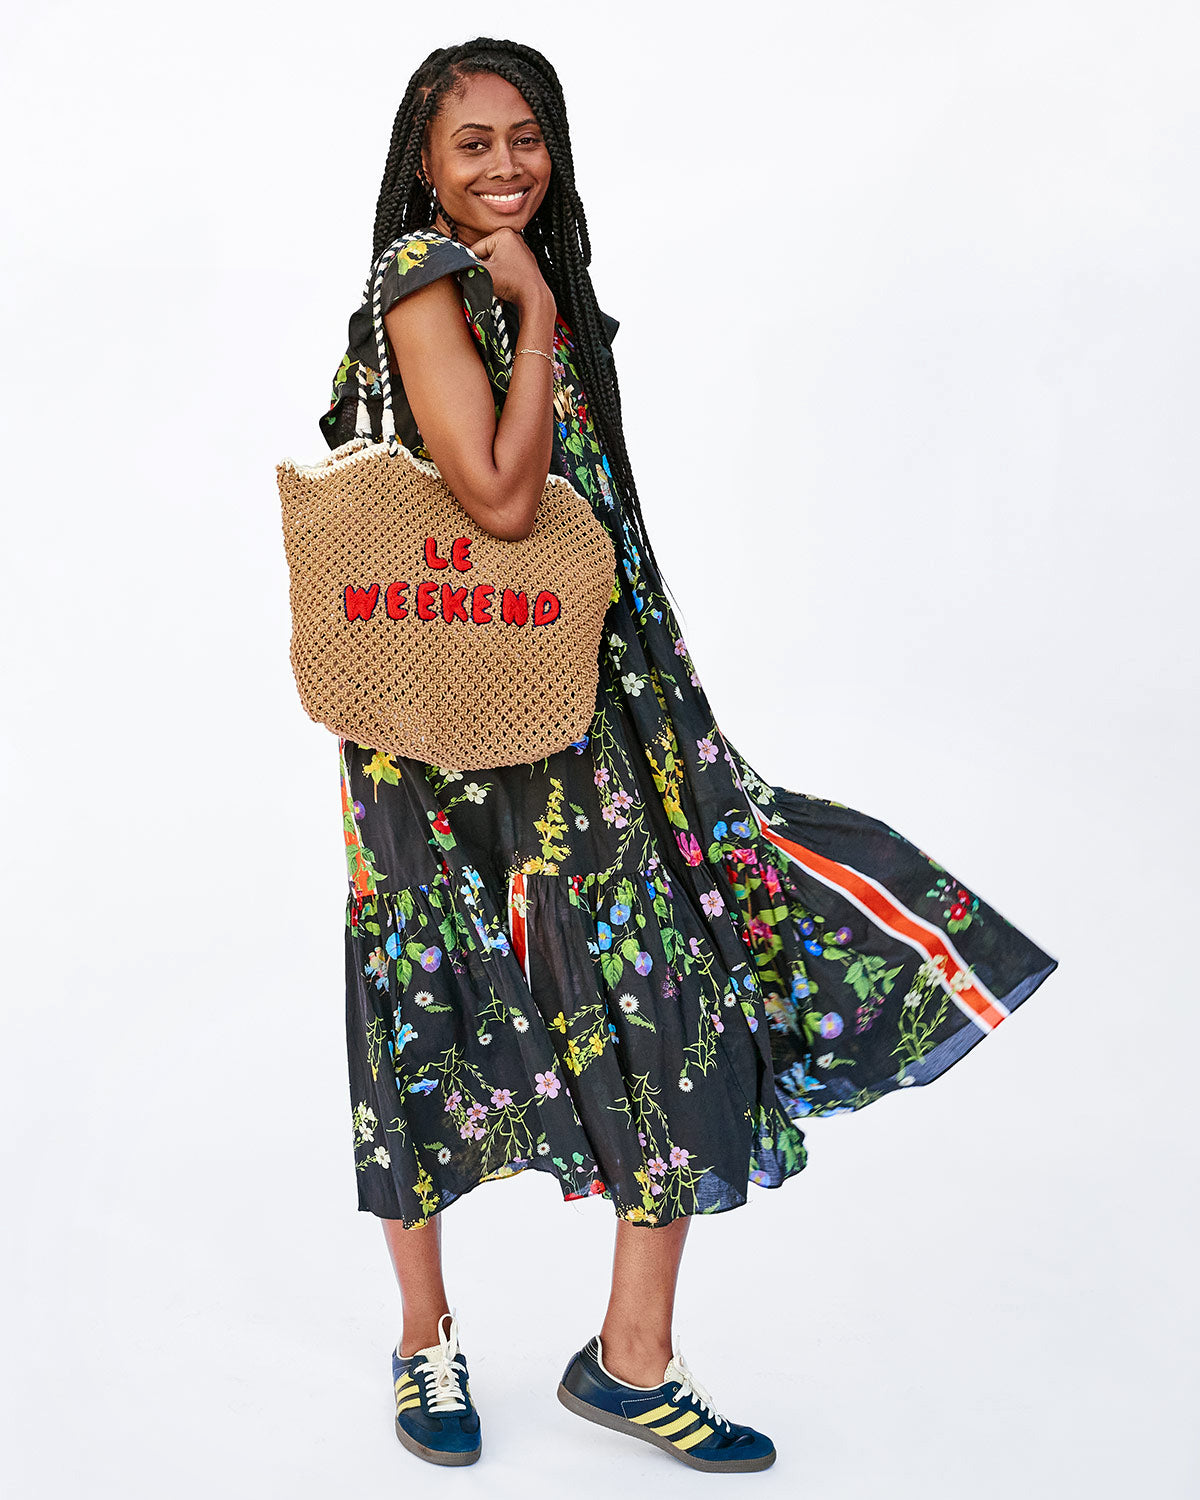 Mecca Holding the Tan Crochet Le Weekend L'Été Tote  on her Shoulder and Swinging her Dress